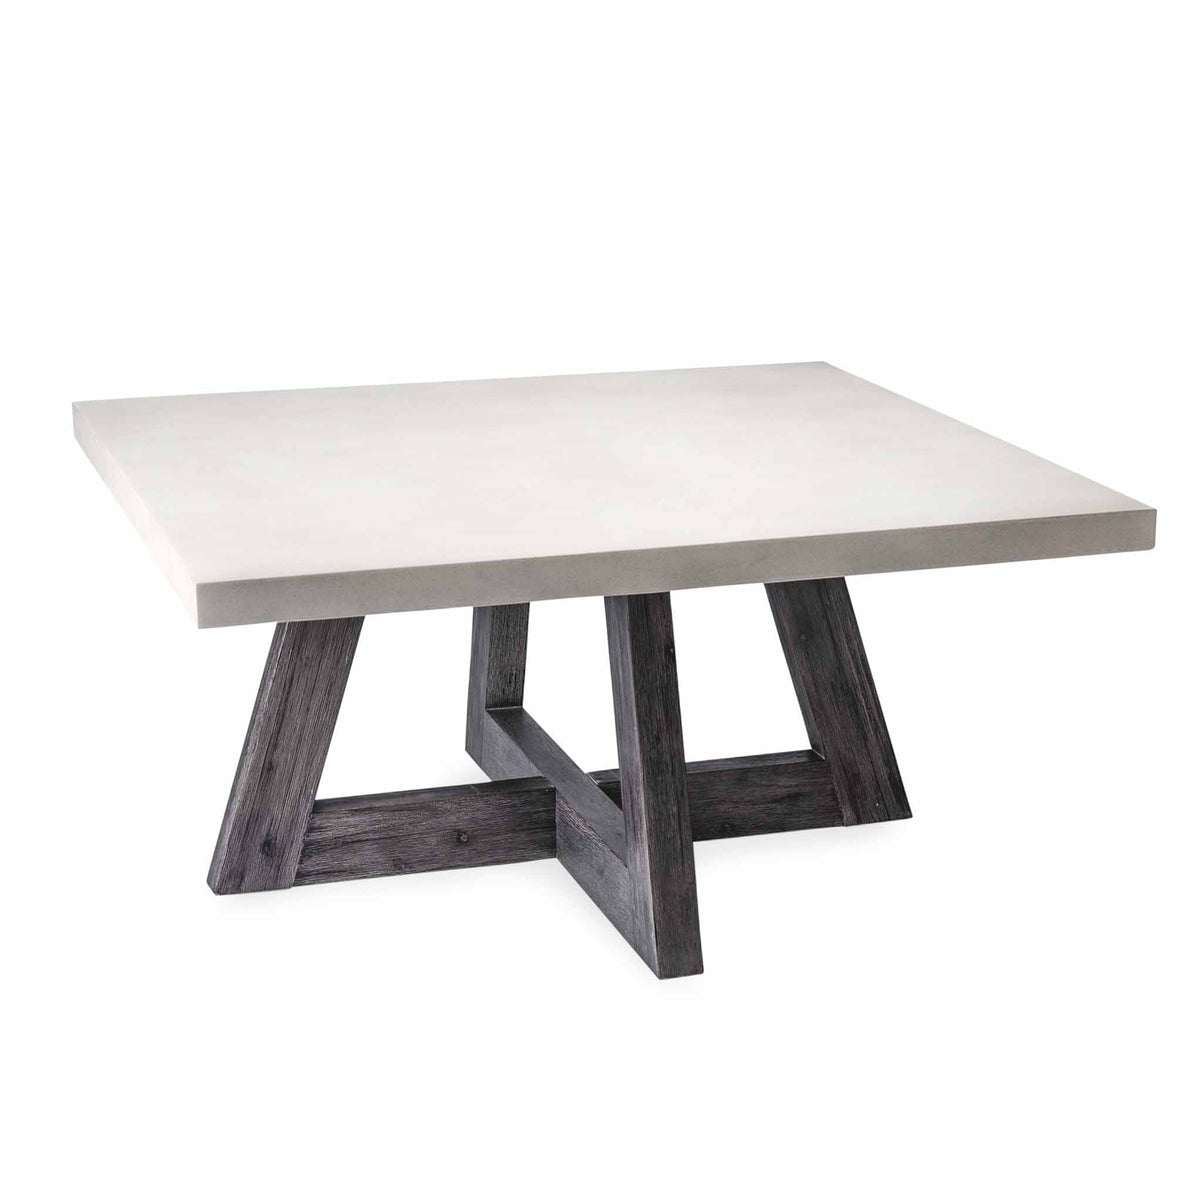 Saltaire Industrial Grey Square Concrete Coffee Table from Roseland Furniture